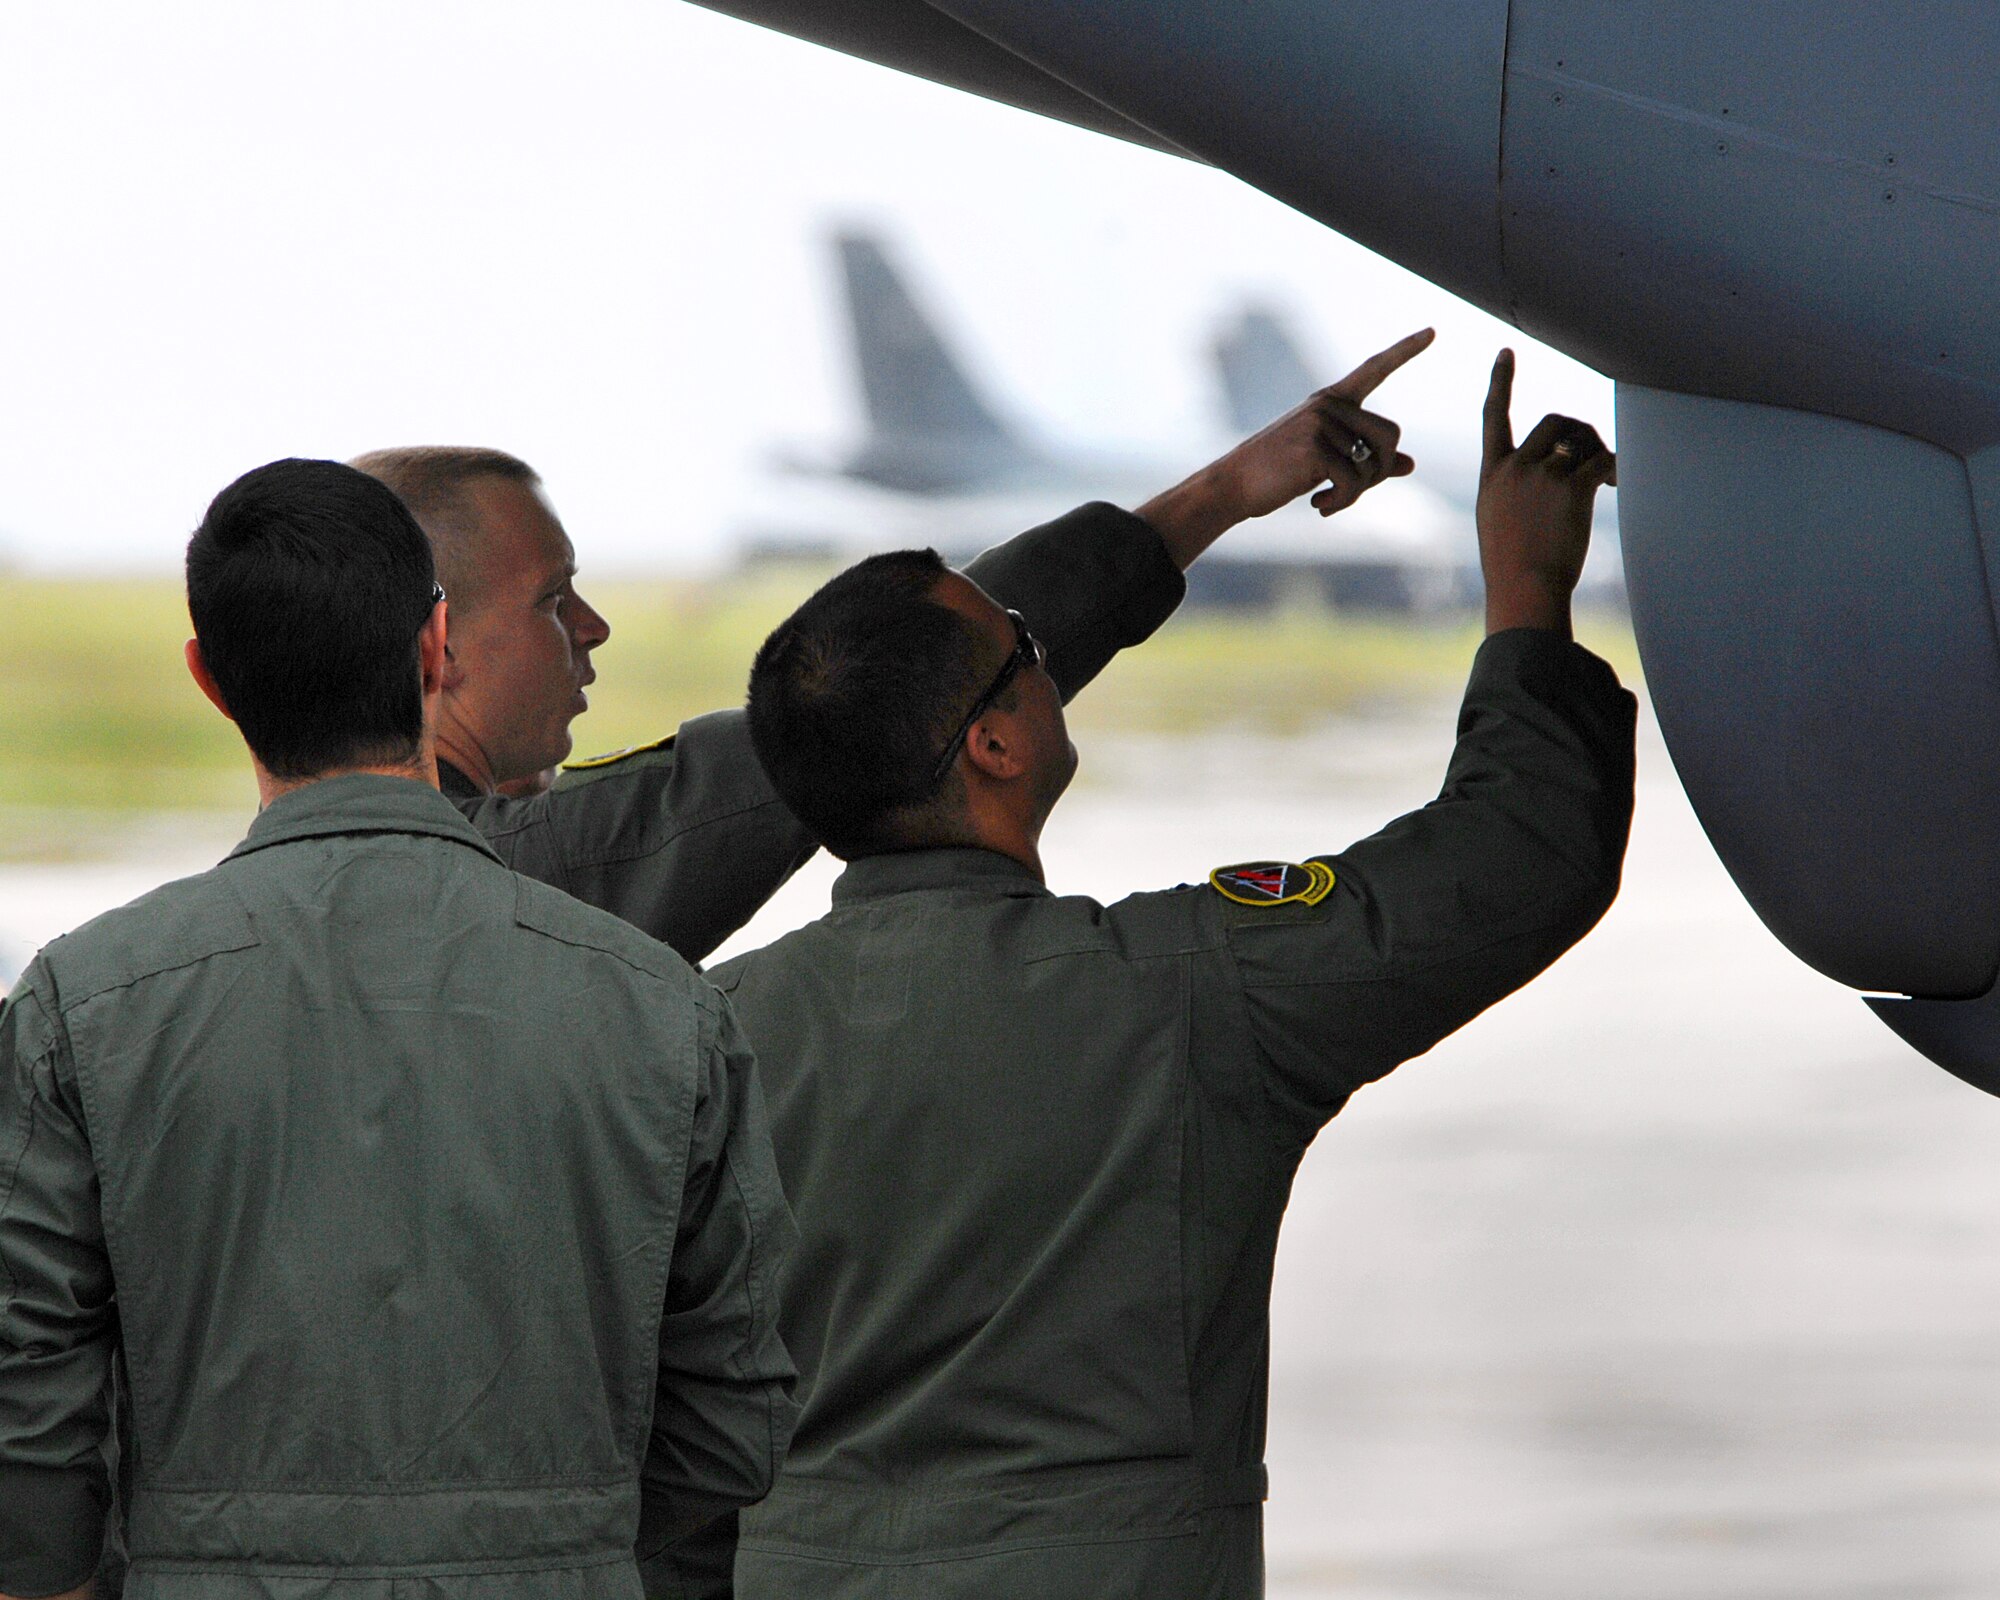 Andersen Air Force Base, Guam -- Aircrew from the 96th Expeditionary Bomb Squadron check out the nose radome of a B-52 Stratofortress before taking off on a training mission at Andersen Air Force Base, Guam. The 96th Expeditionary Bomb Squadron deployed from Barksdale AFB, La. (U.S. Air Force photo/Staff Sgt. Vanessa Valentine)
